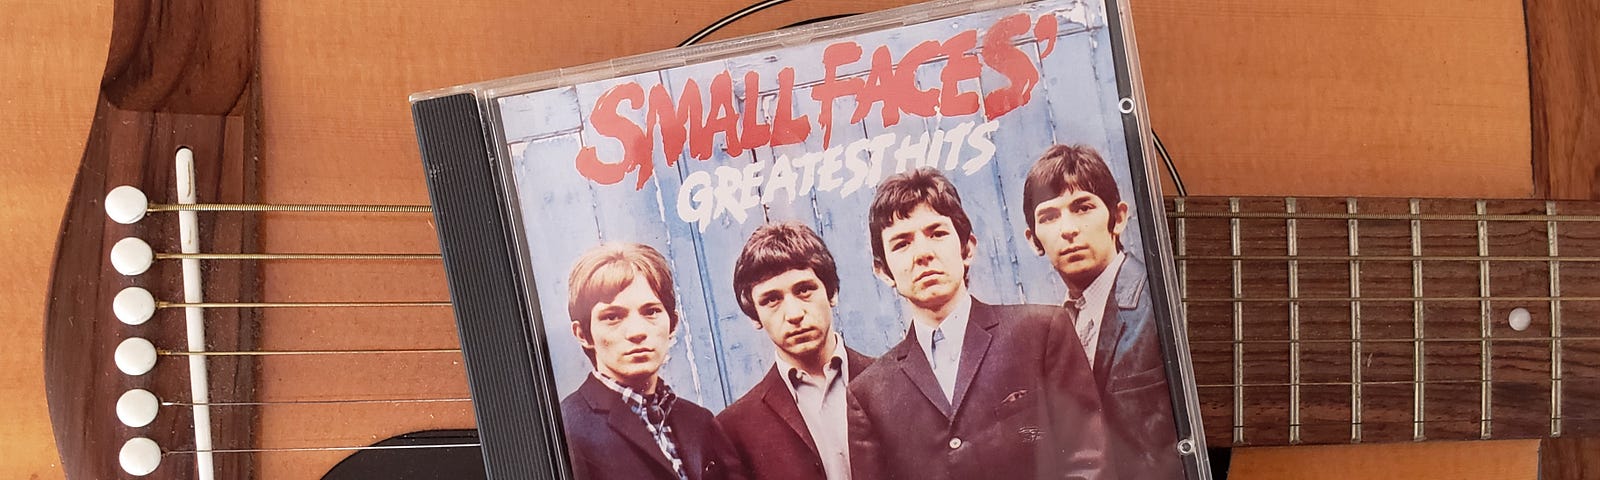 cd cover of the small faces